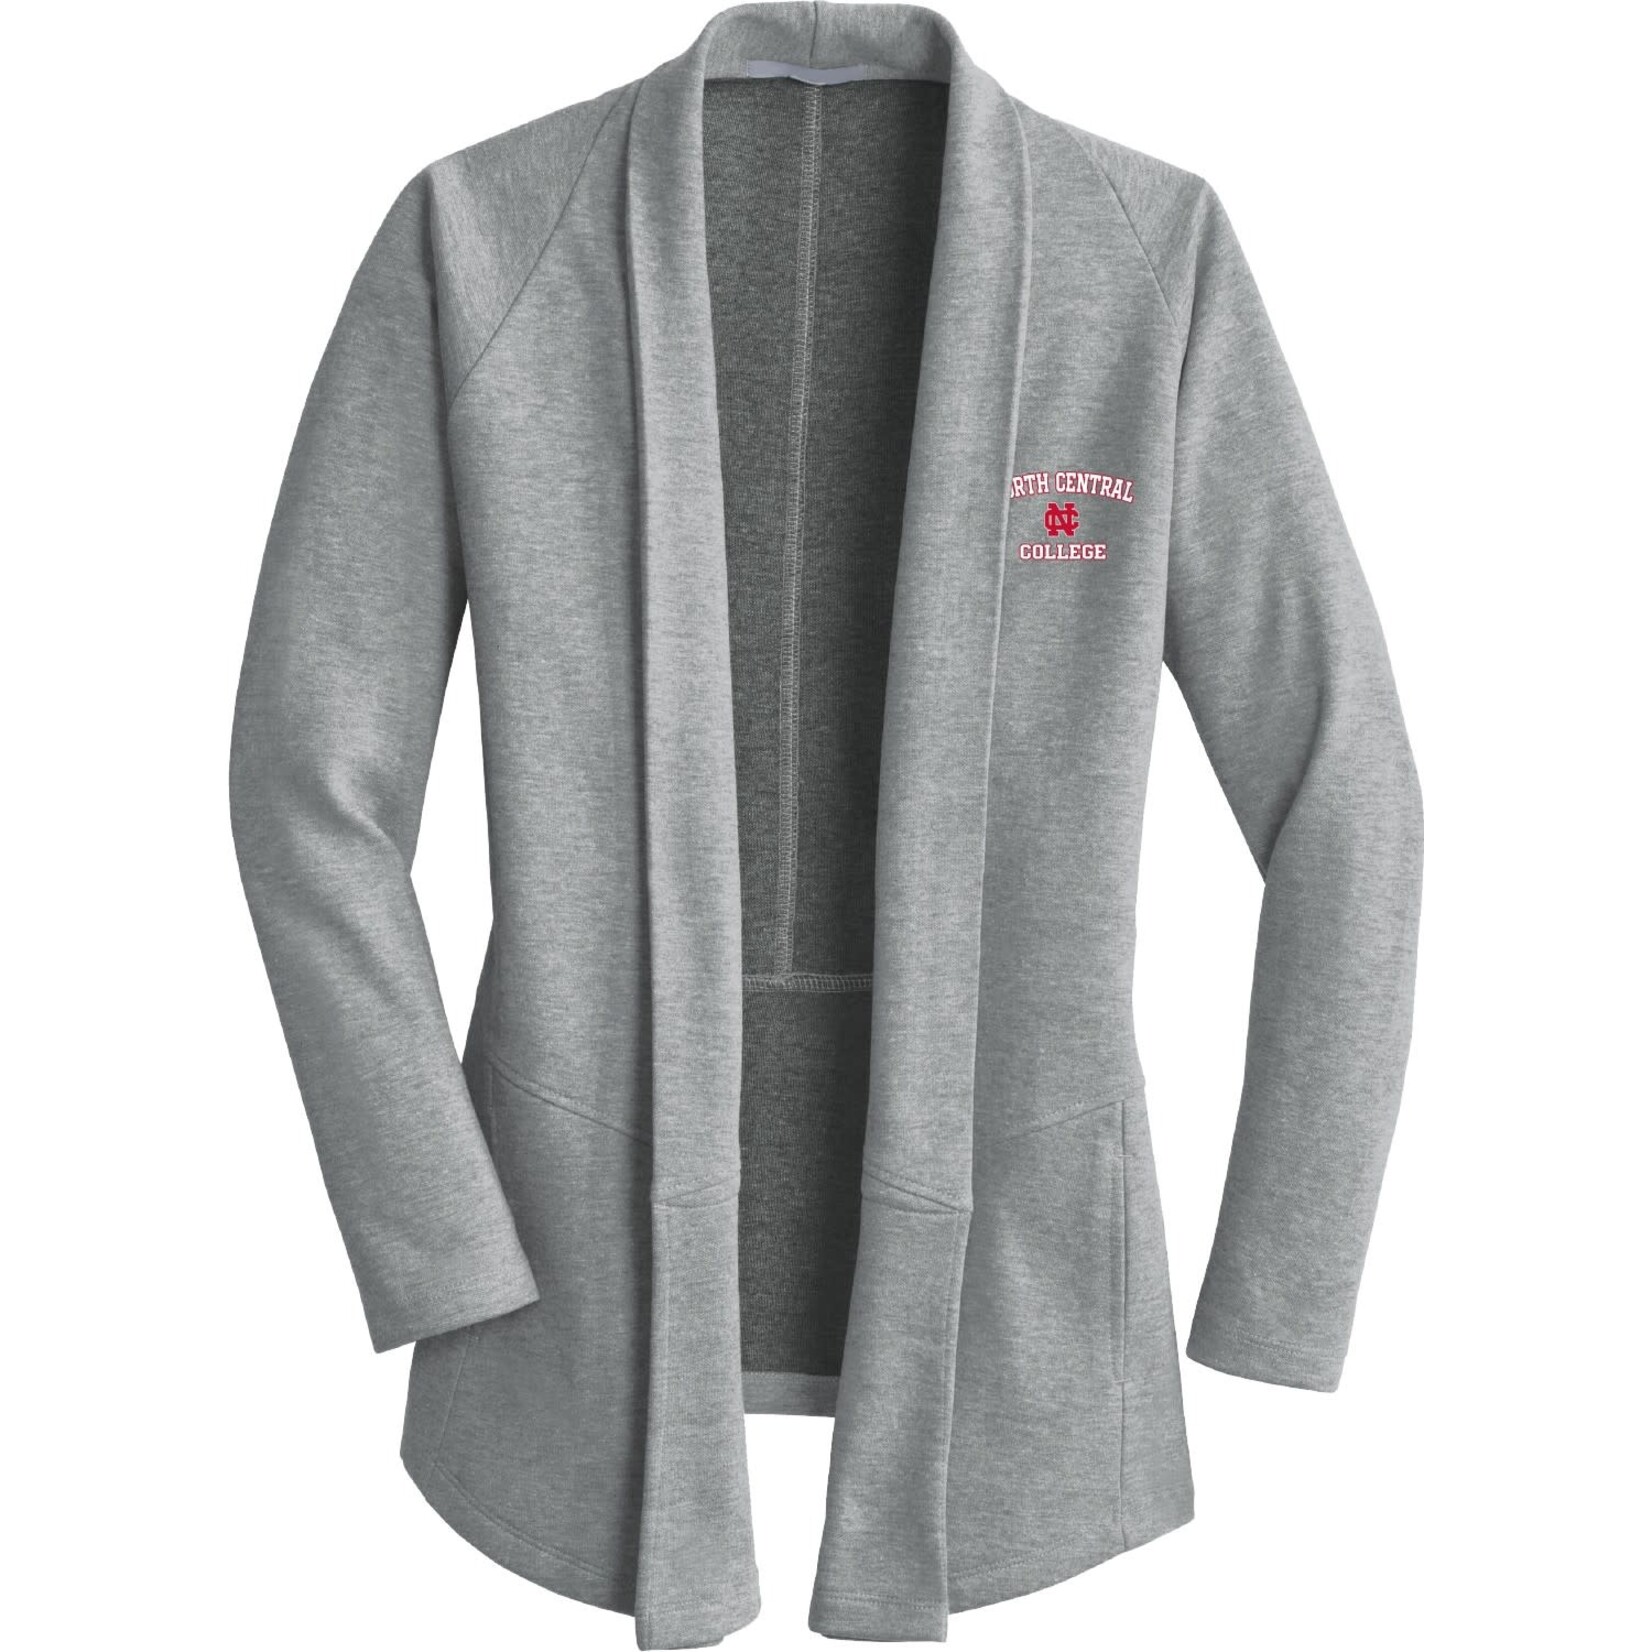 College House NCC Cardigan by College House